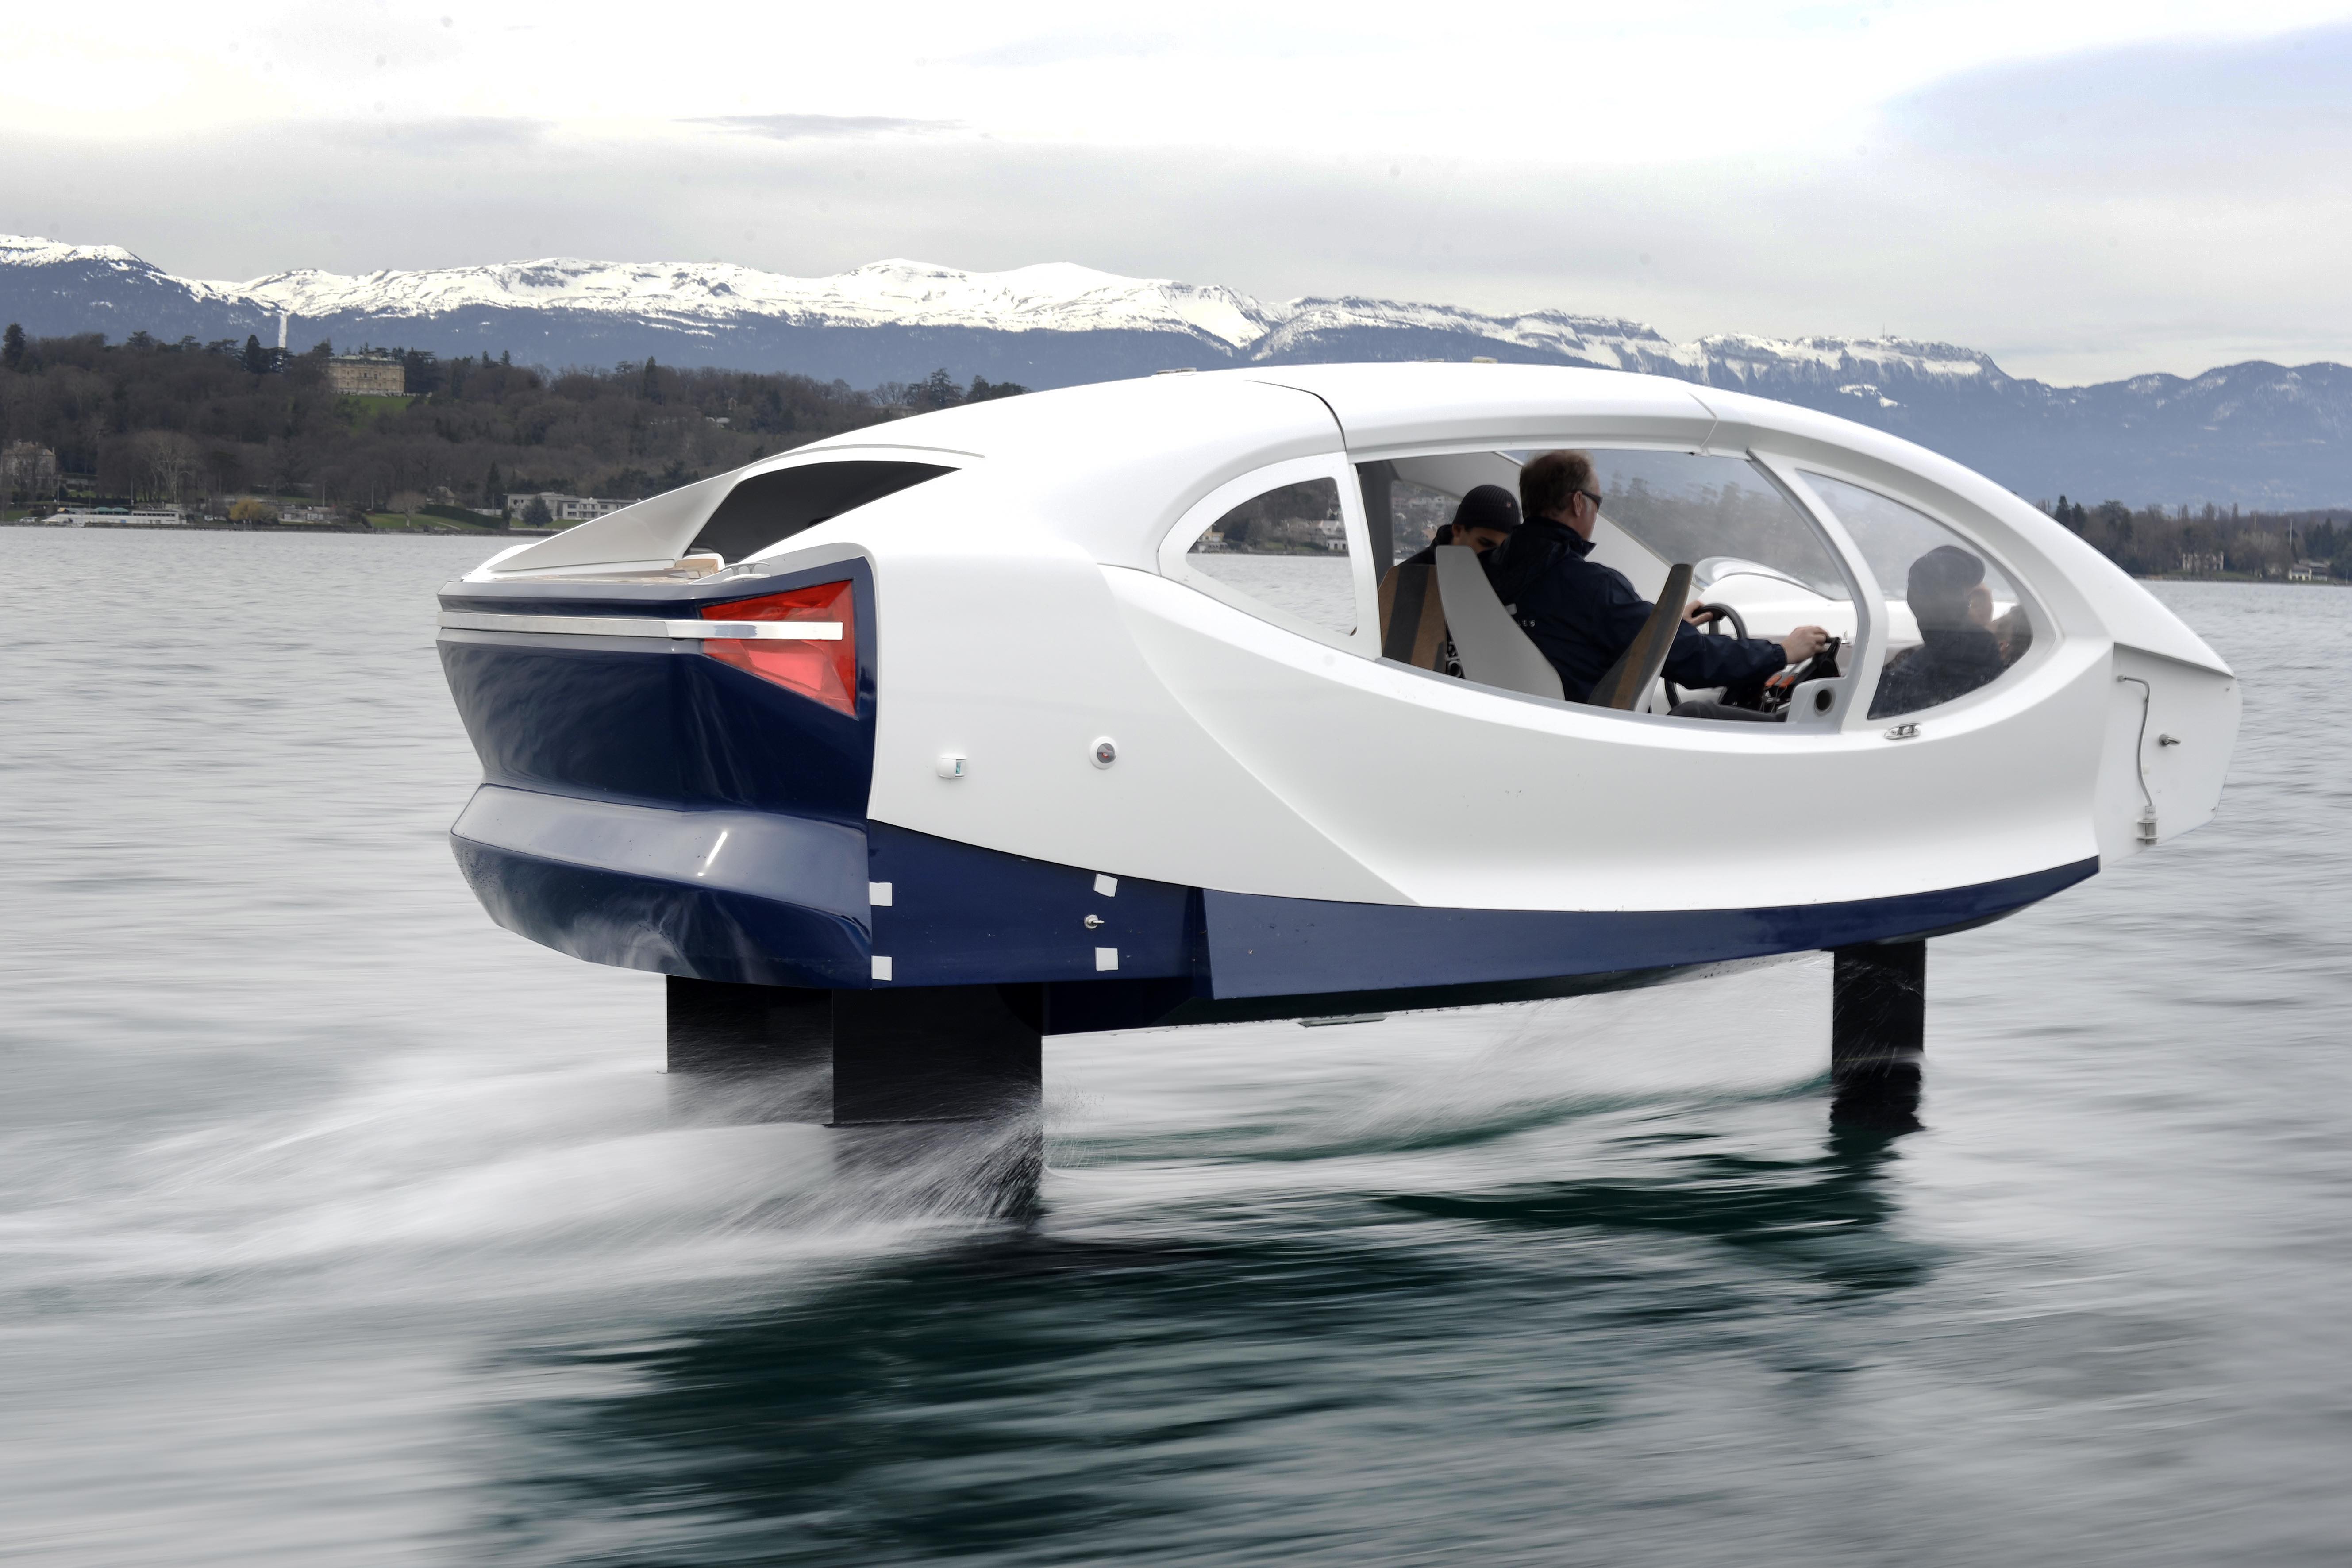 One of the SeaBubbles rises out of the water as it picks up speed